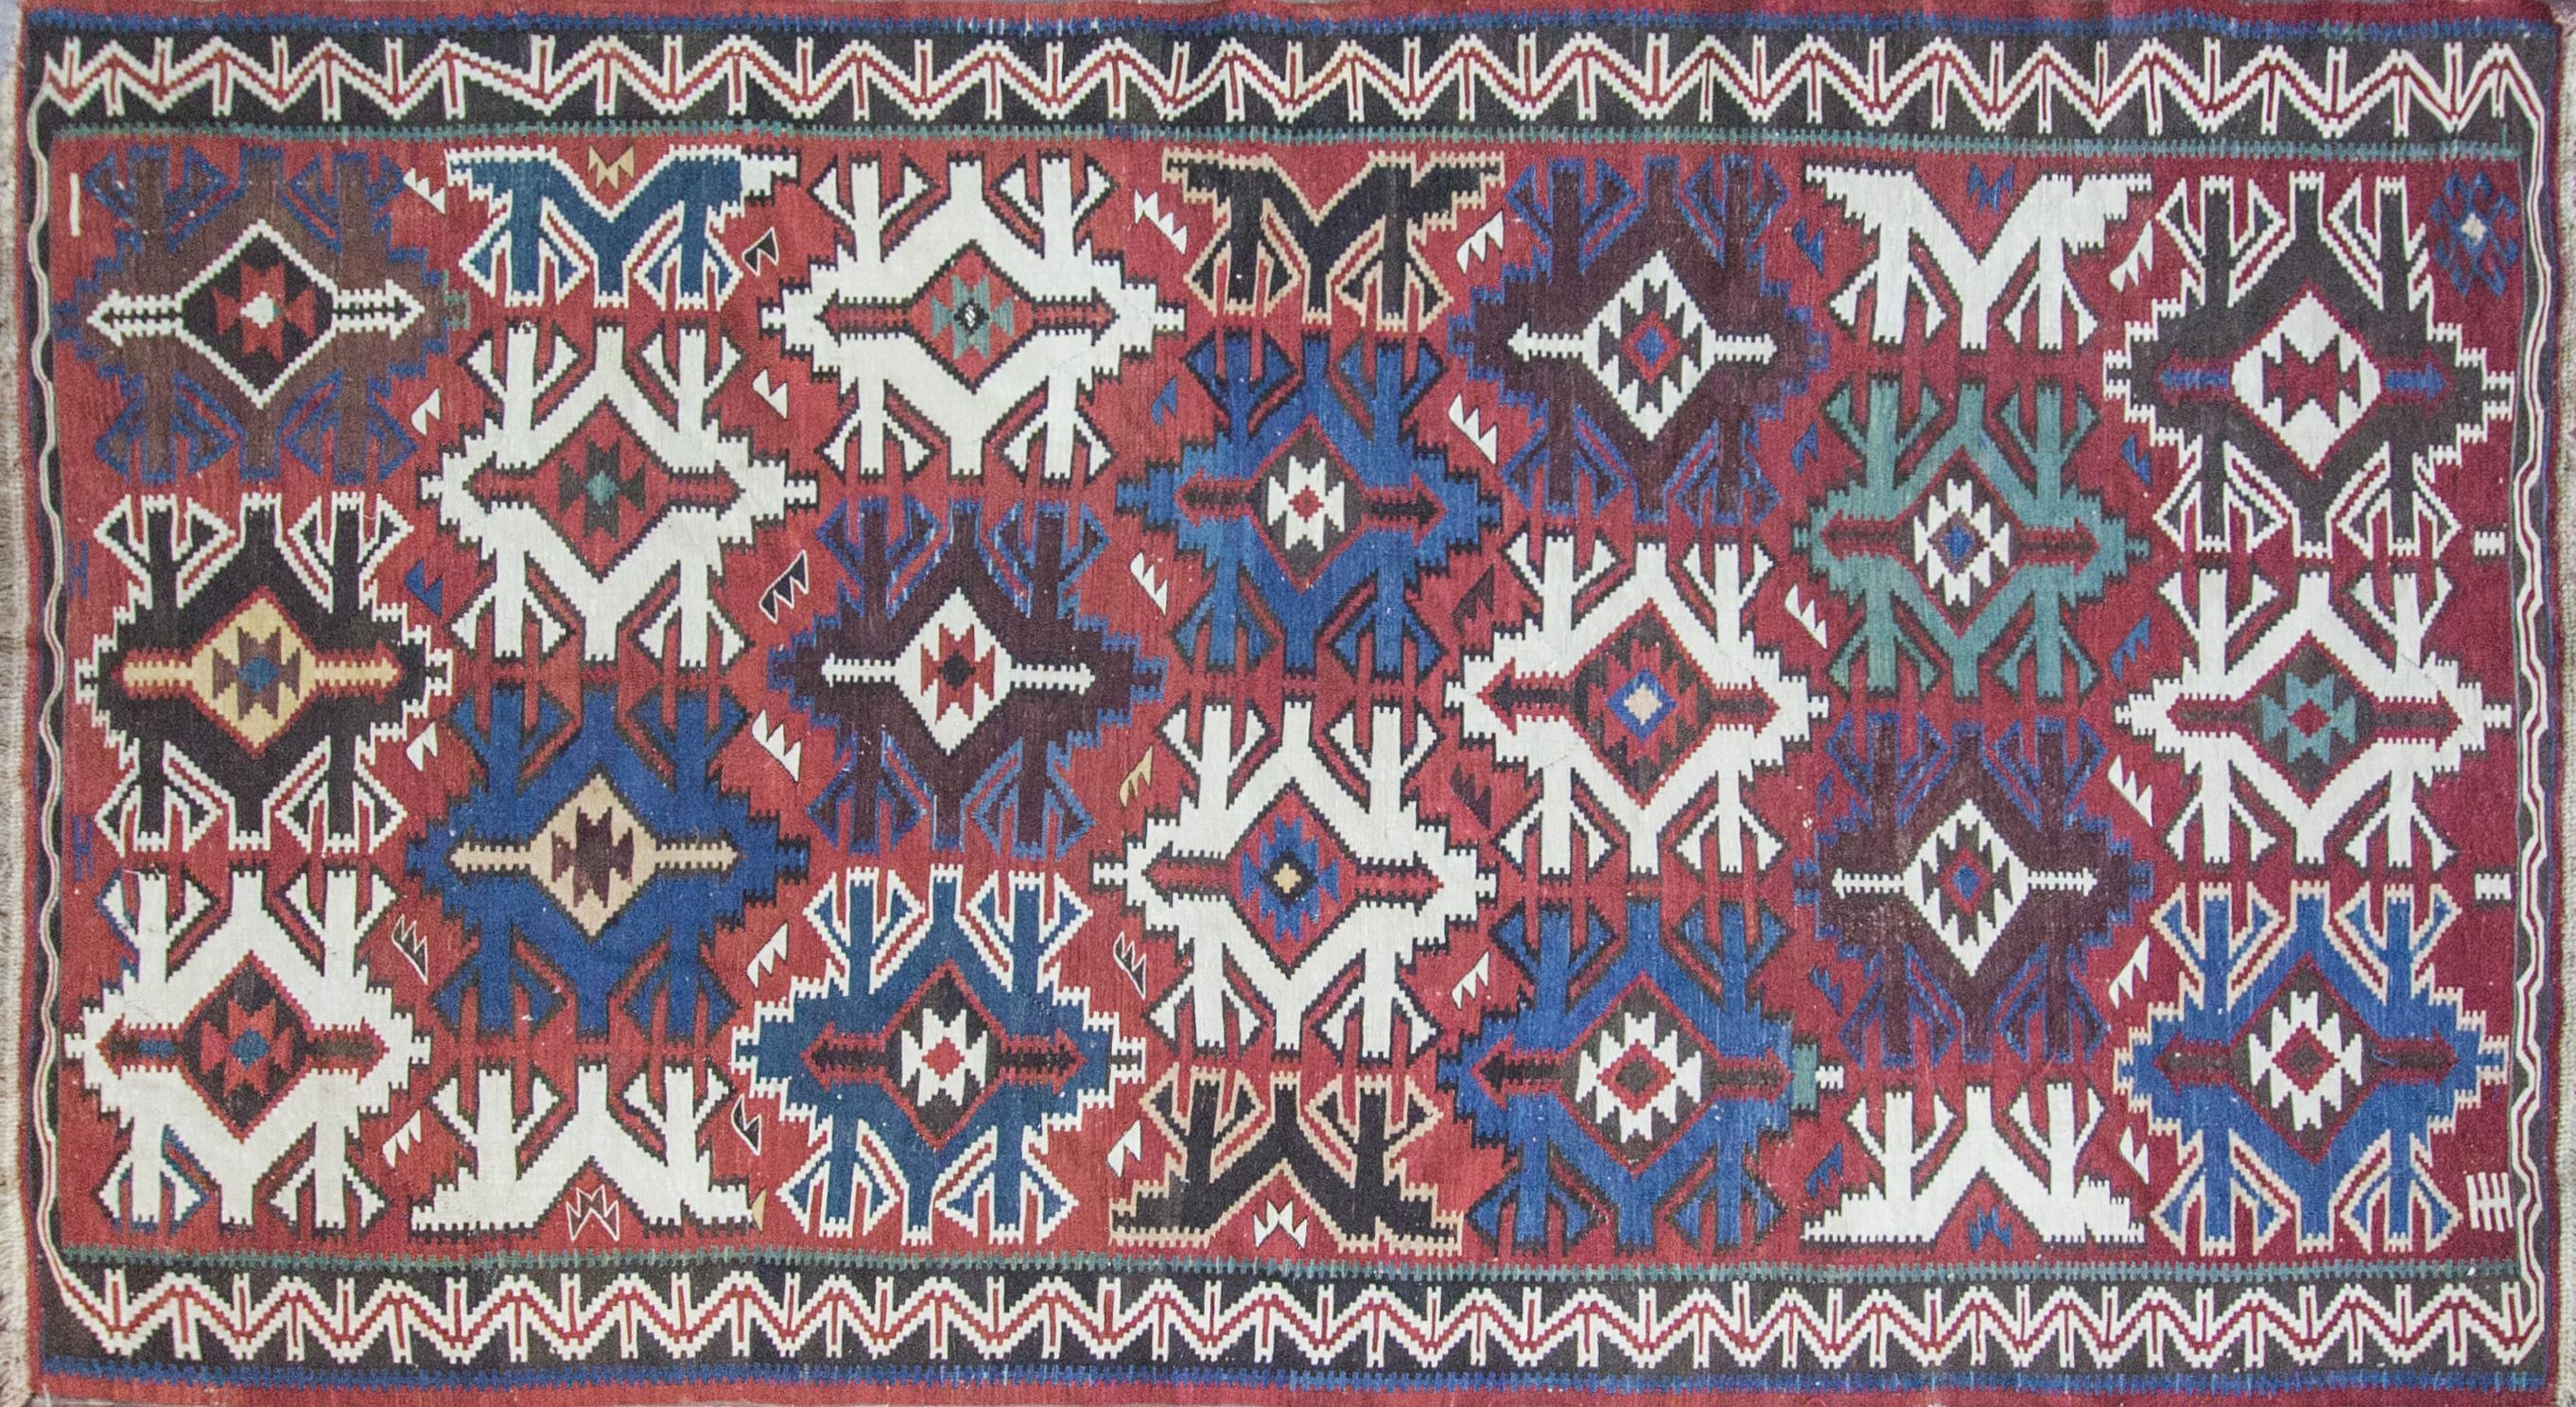 Antique Kilim long carpet, Kuba, late 19th century. An impressive staggered design of serrated palmette set against a blue field on this magnificent antique Kuba Kilim or great classical carpets of the Caucasus. The smaller palmettes and rosettes